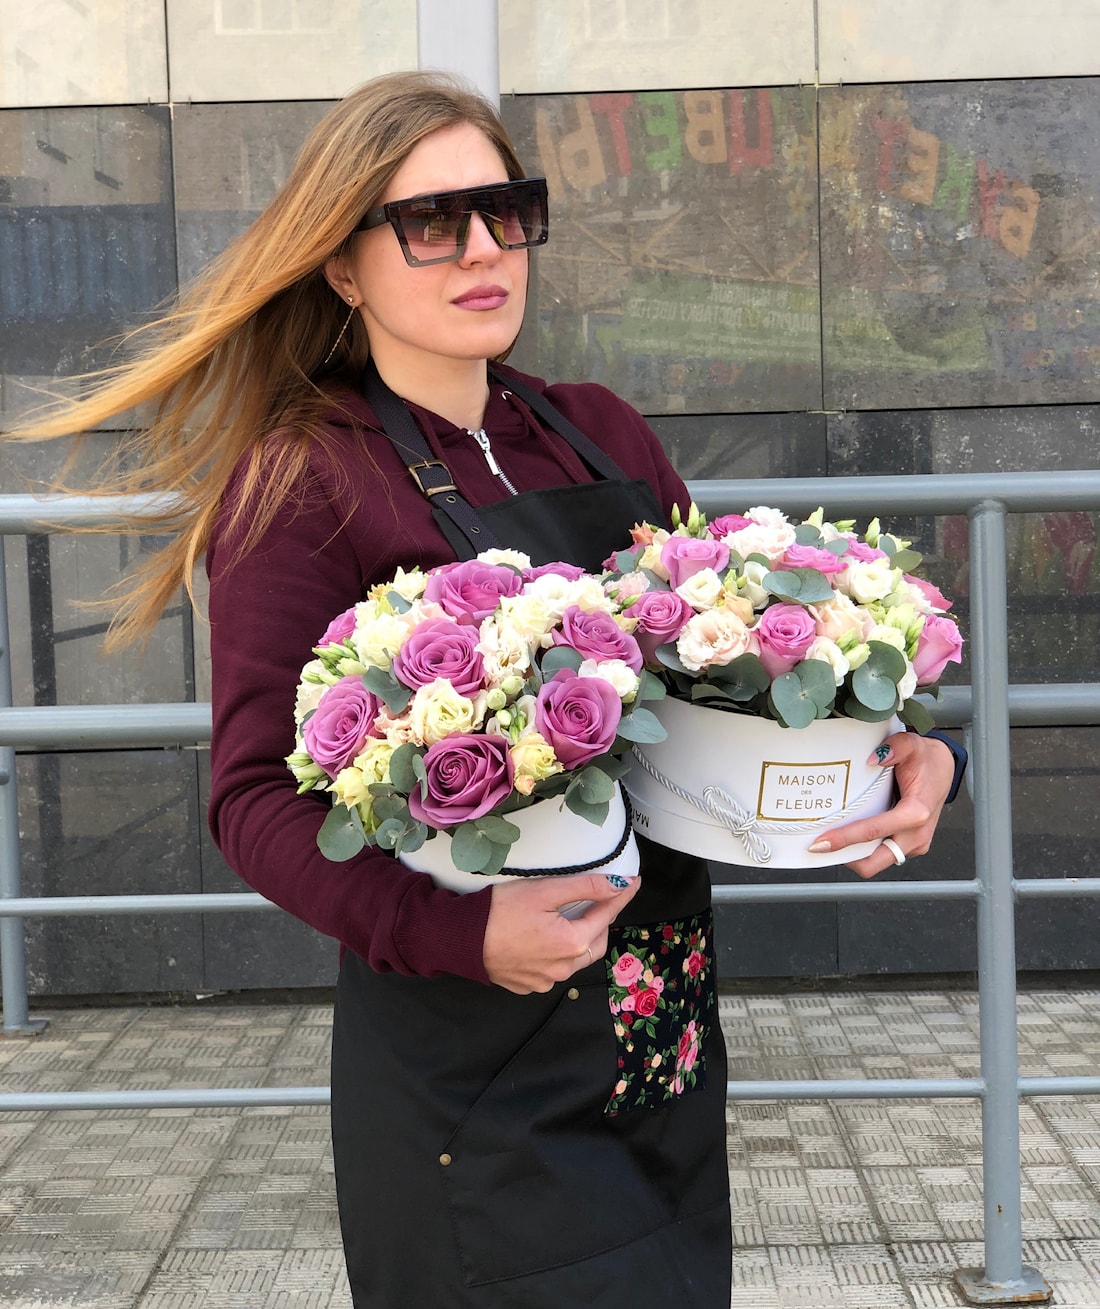 Express Delivery of flowers from the flower shop 